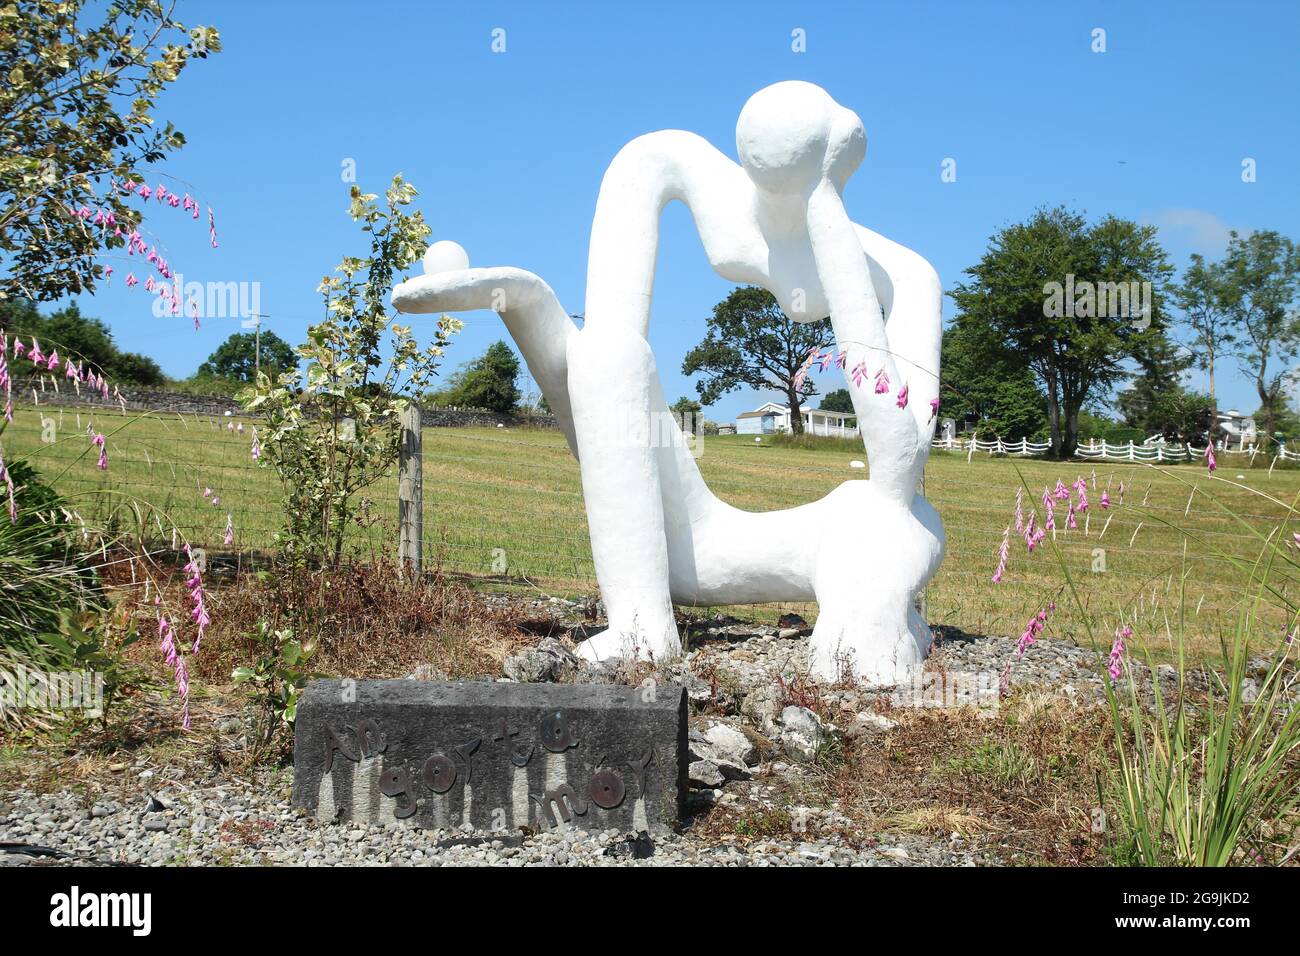 An Gorta Mor, a sculpture by artist John Malone commemorating the Great Famine in Ireland Stock Photo